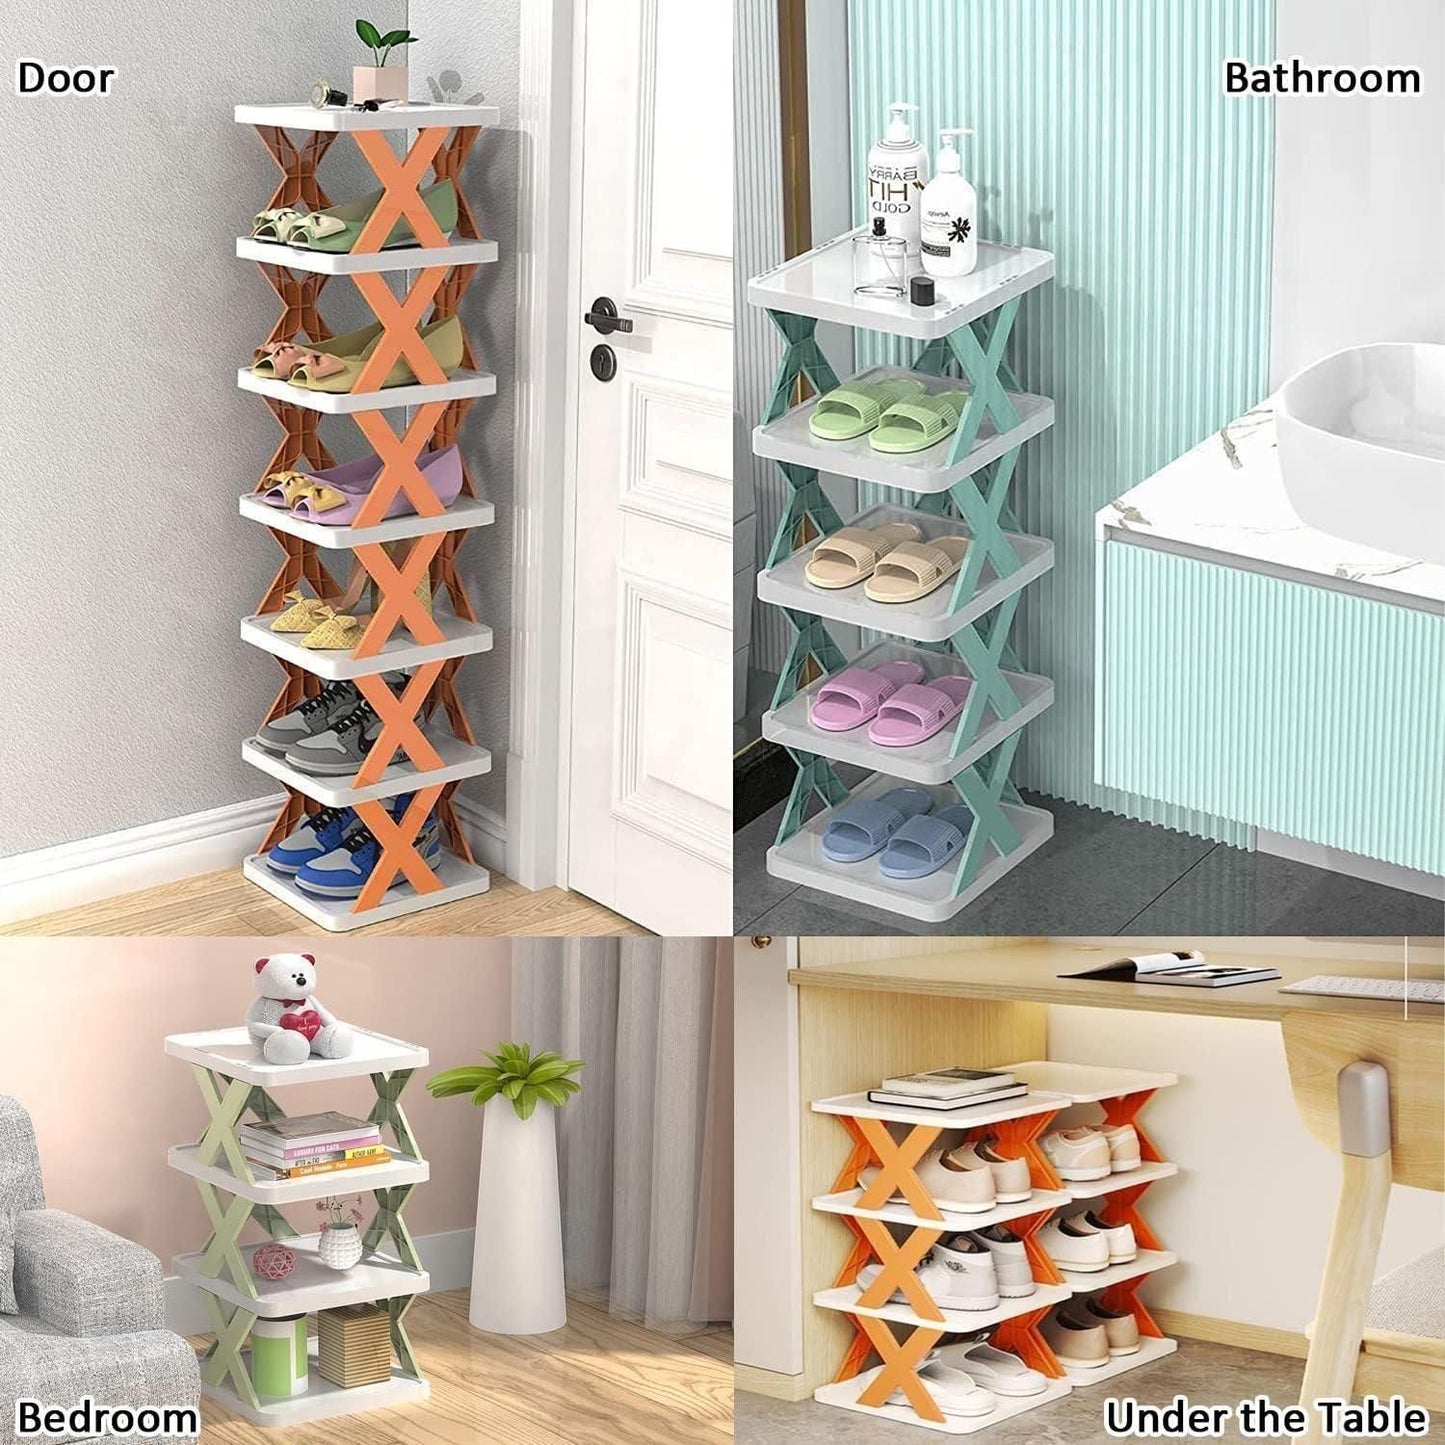 Five Layer Shoes Organizer(Pack of 2)